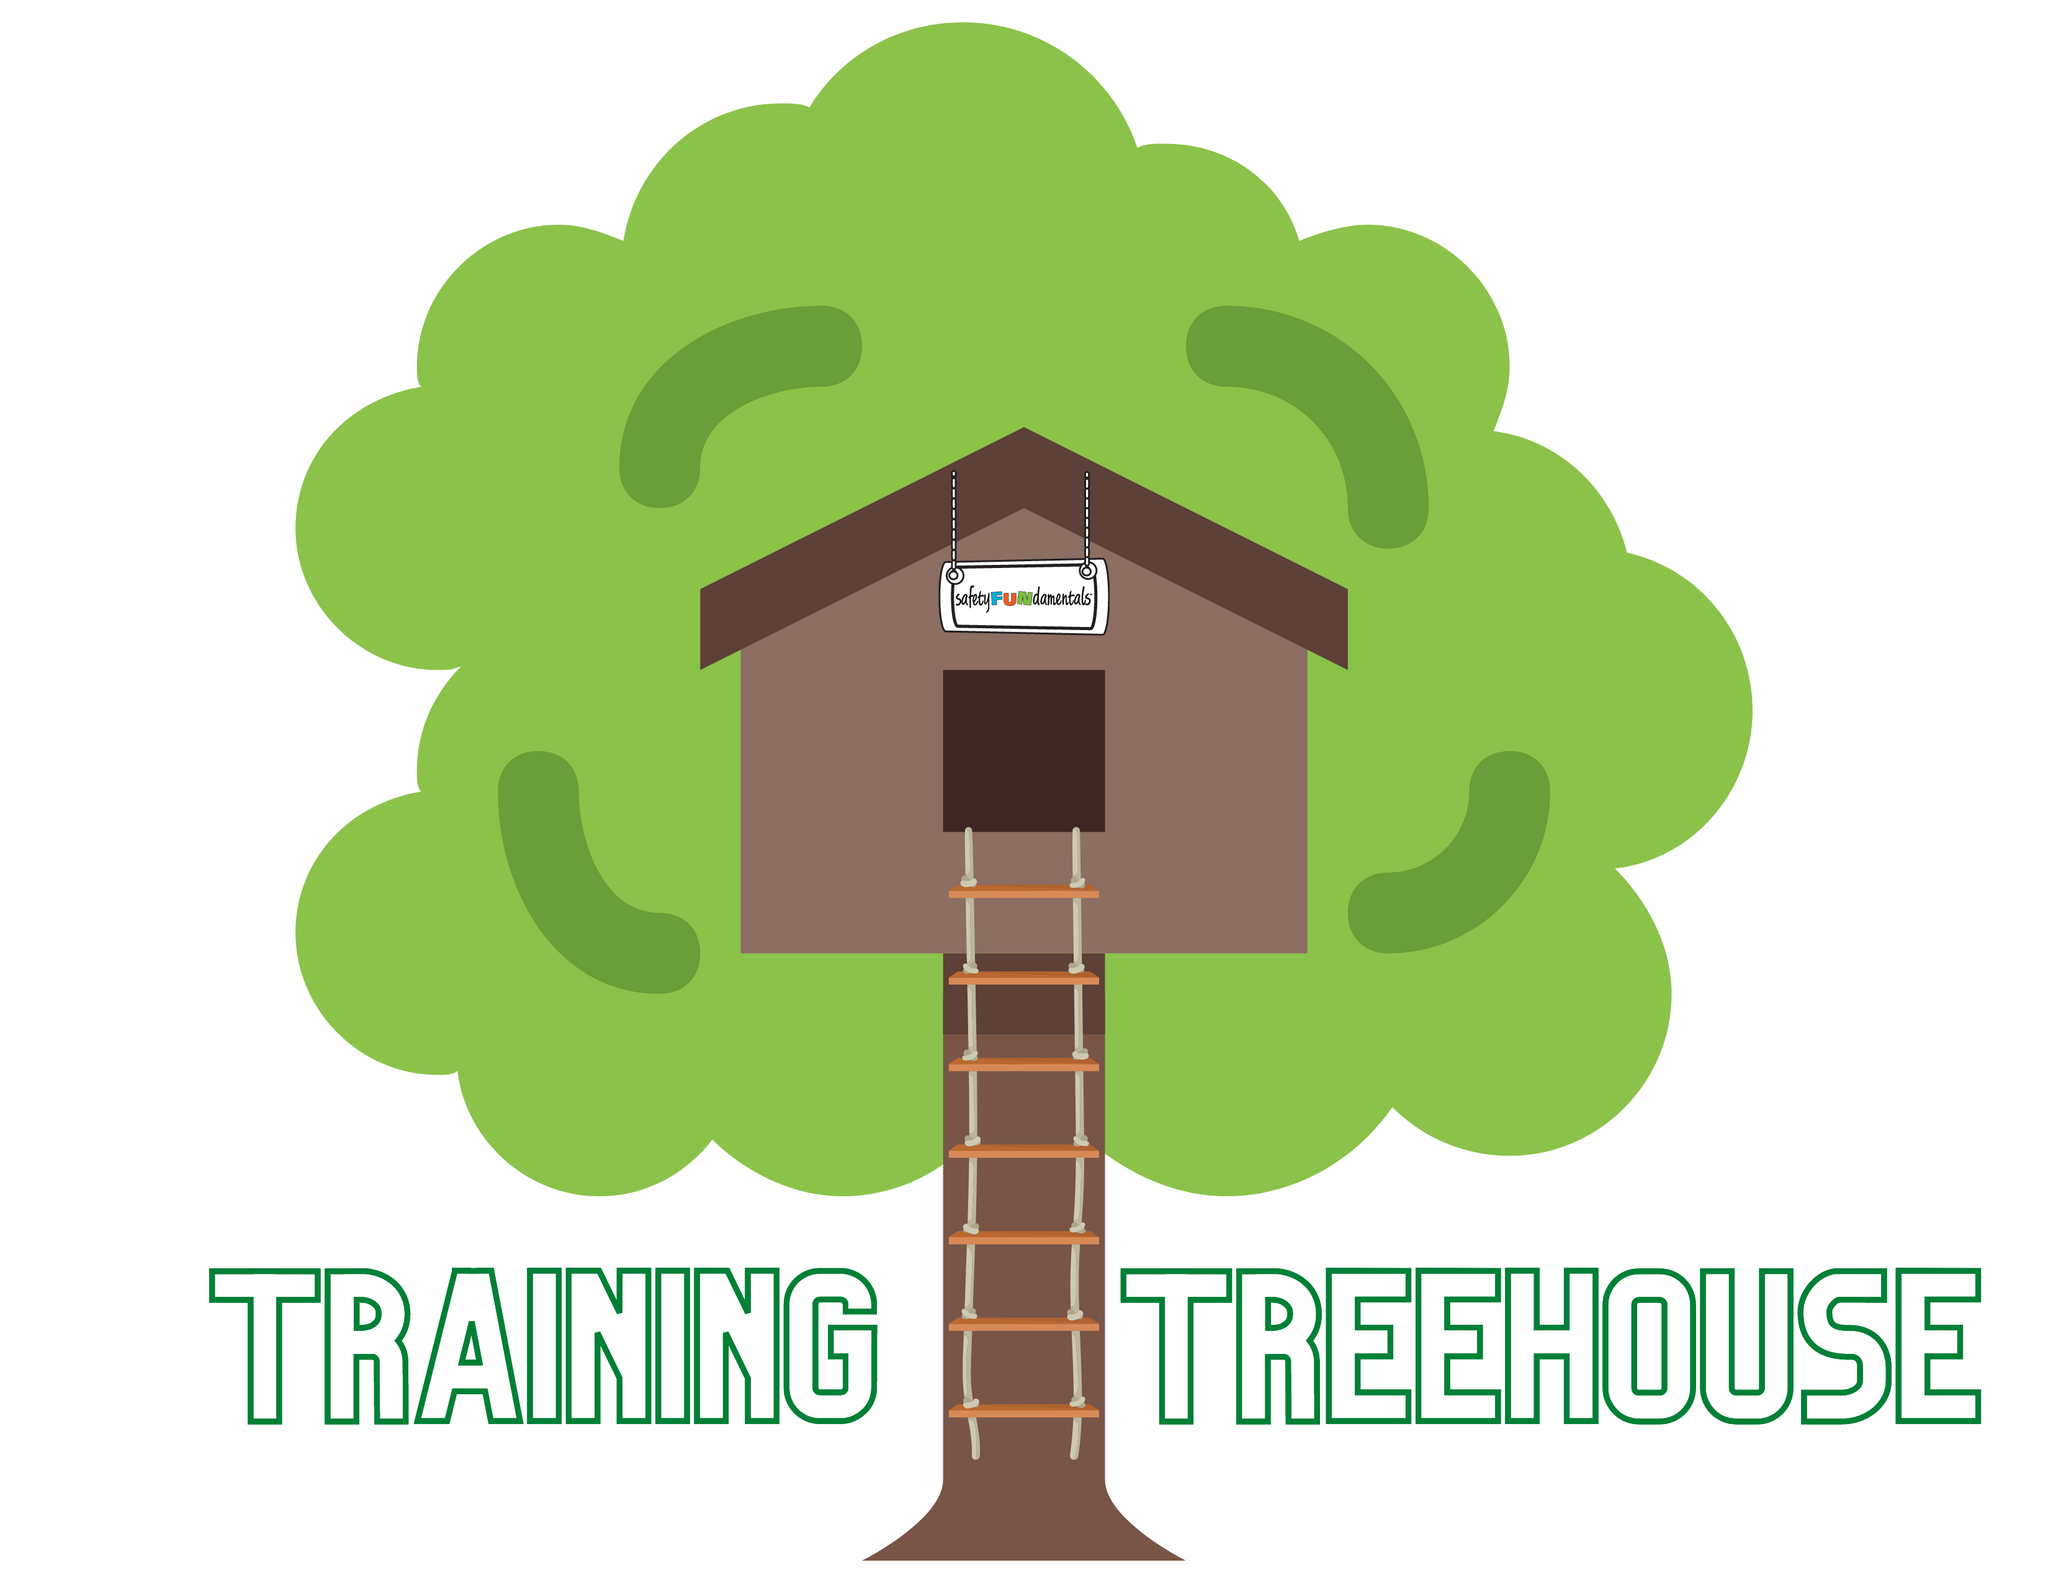 Plan to Join Us in the Training Treehouse!